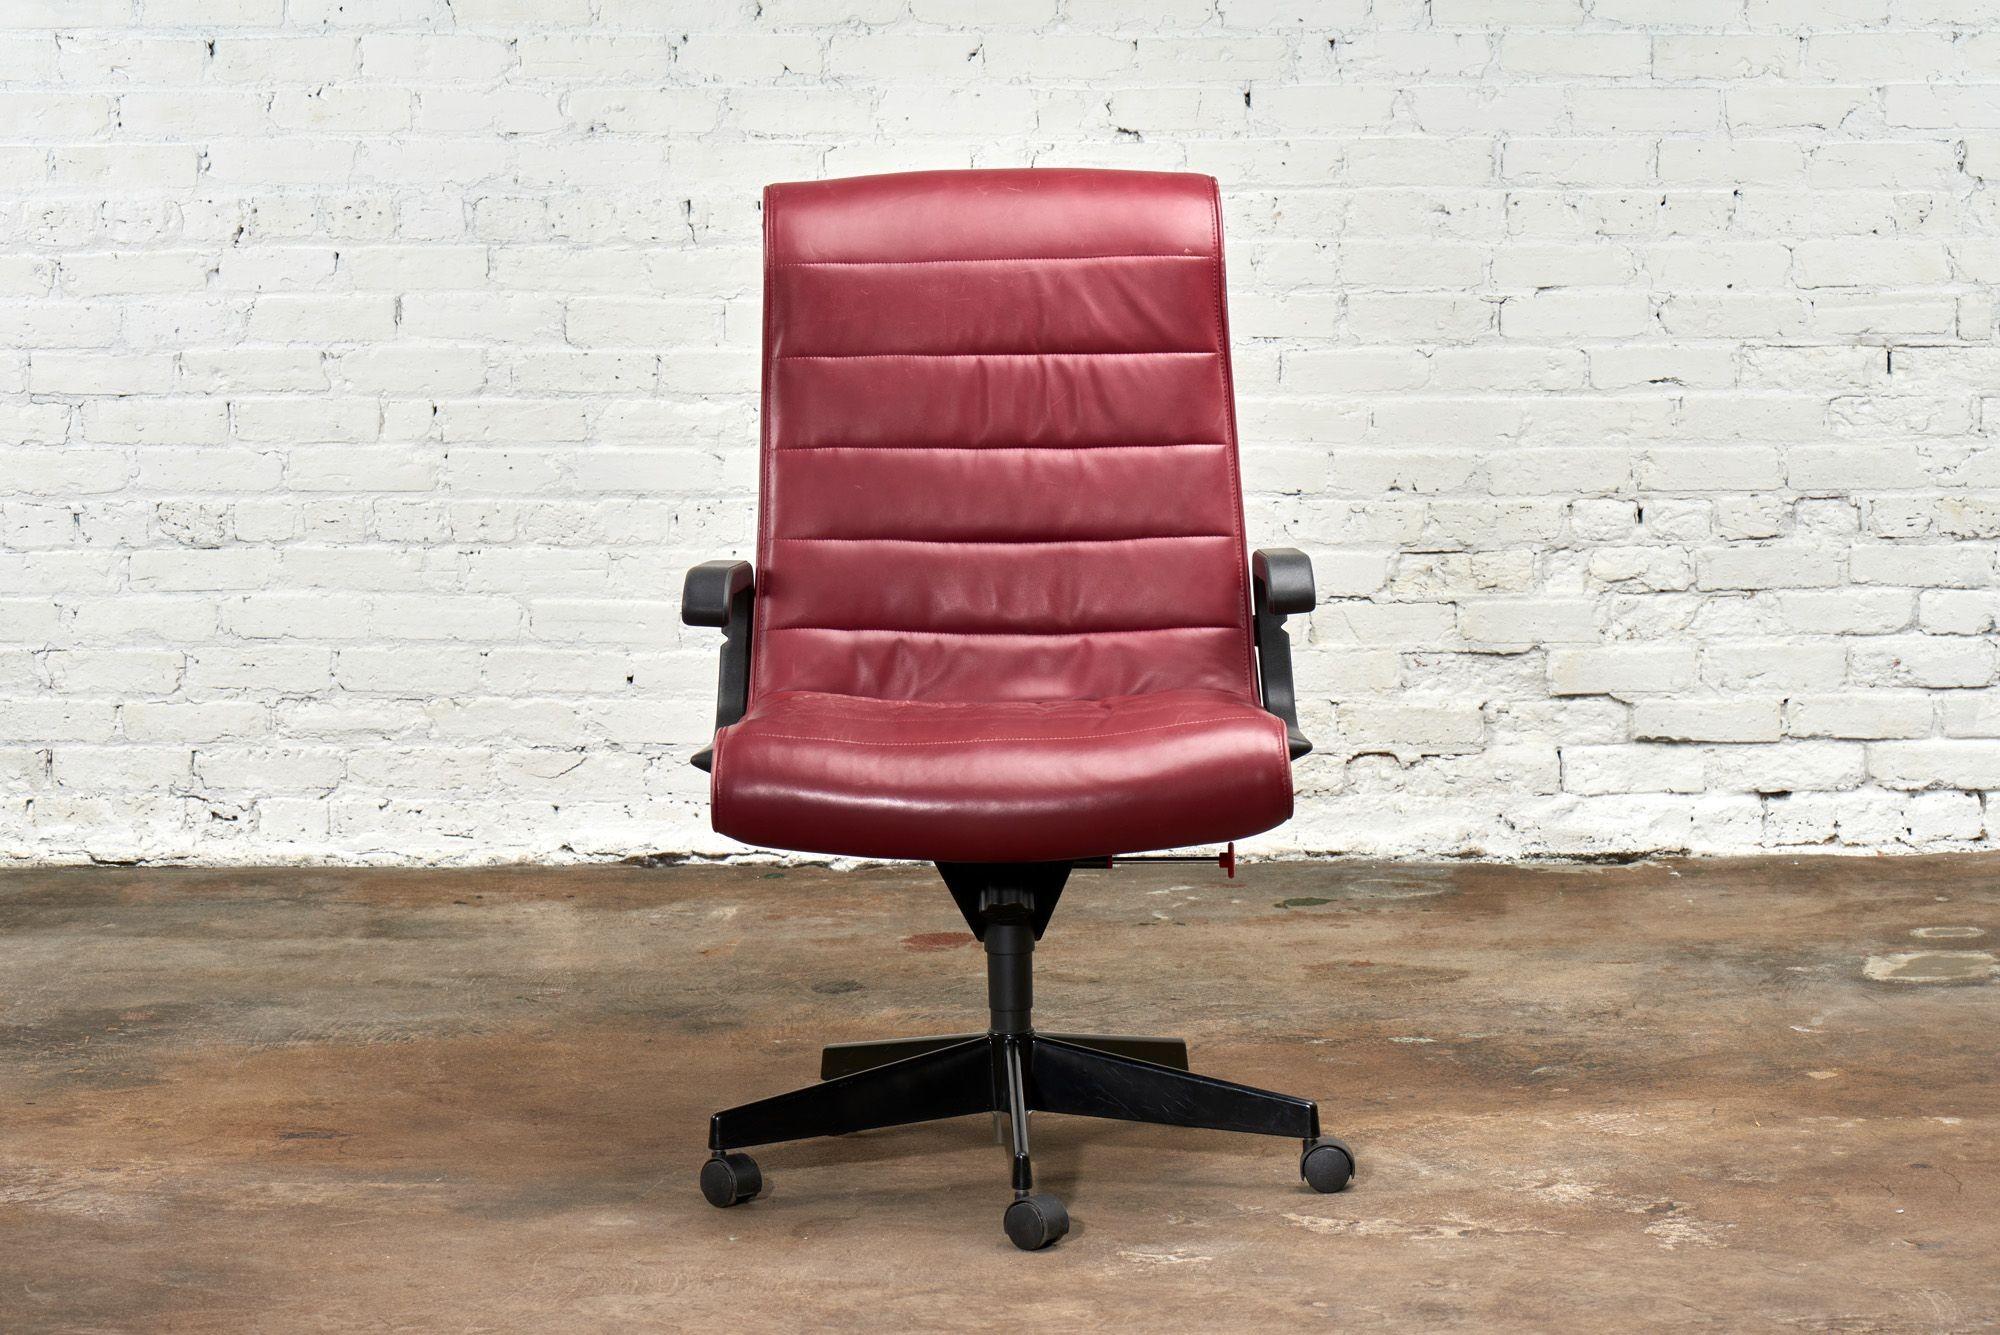 Red Leather Office/Desk Chair for Knoll/Knoll Intl, France 1992. Original Leather is great condition.

